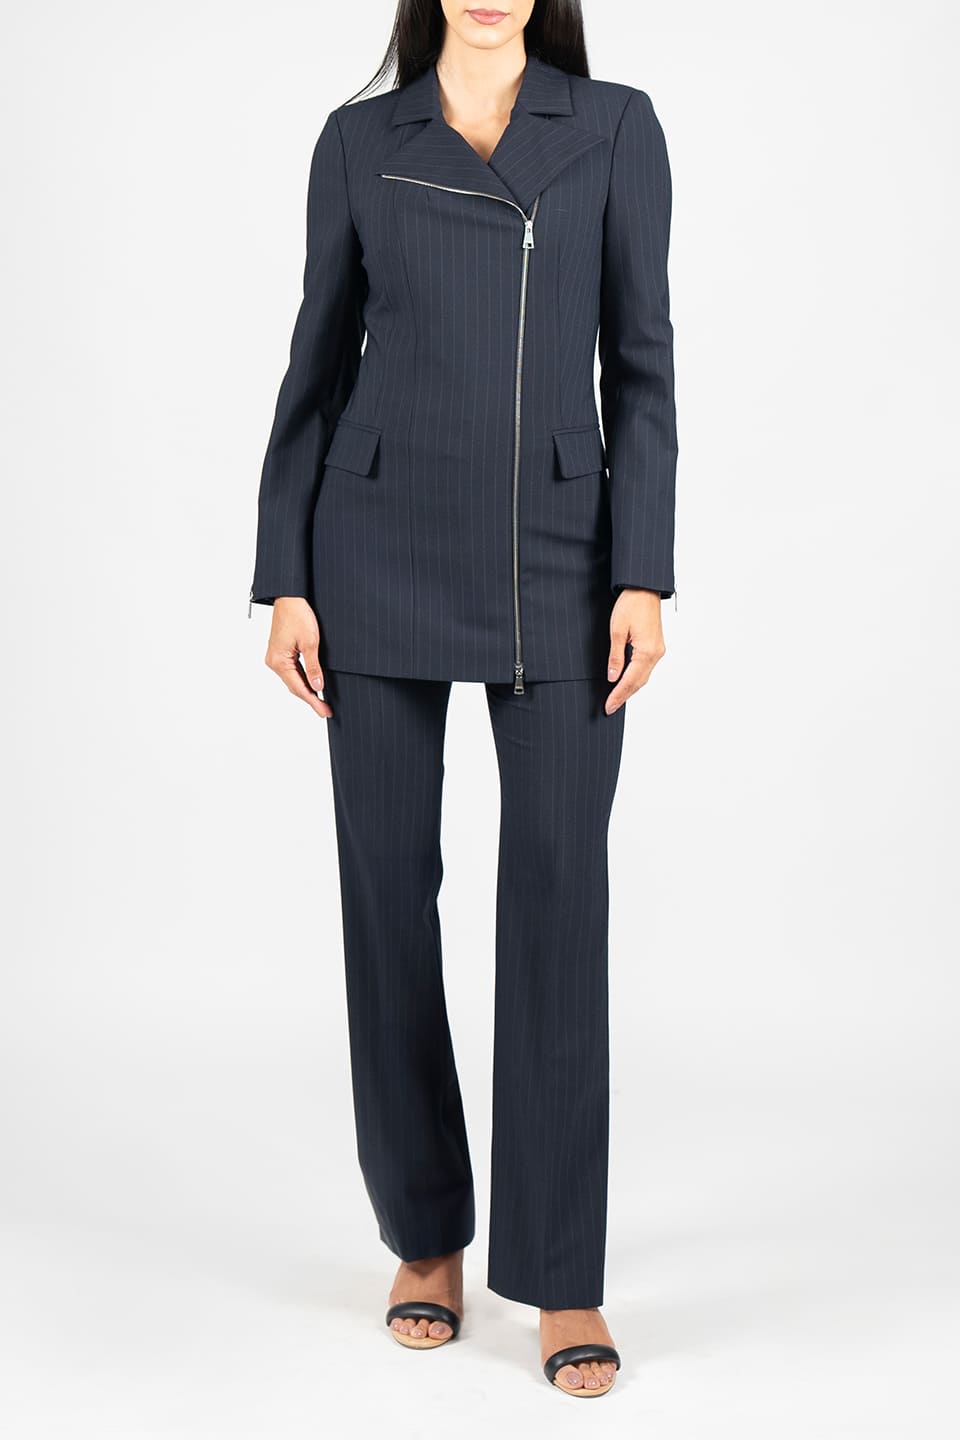 Designer Blue Women pants, shop online with free delivery in UAE. Product gallery 6